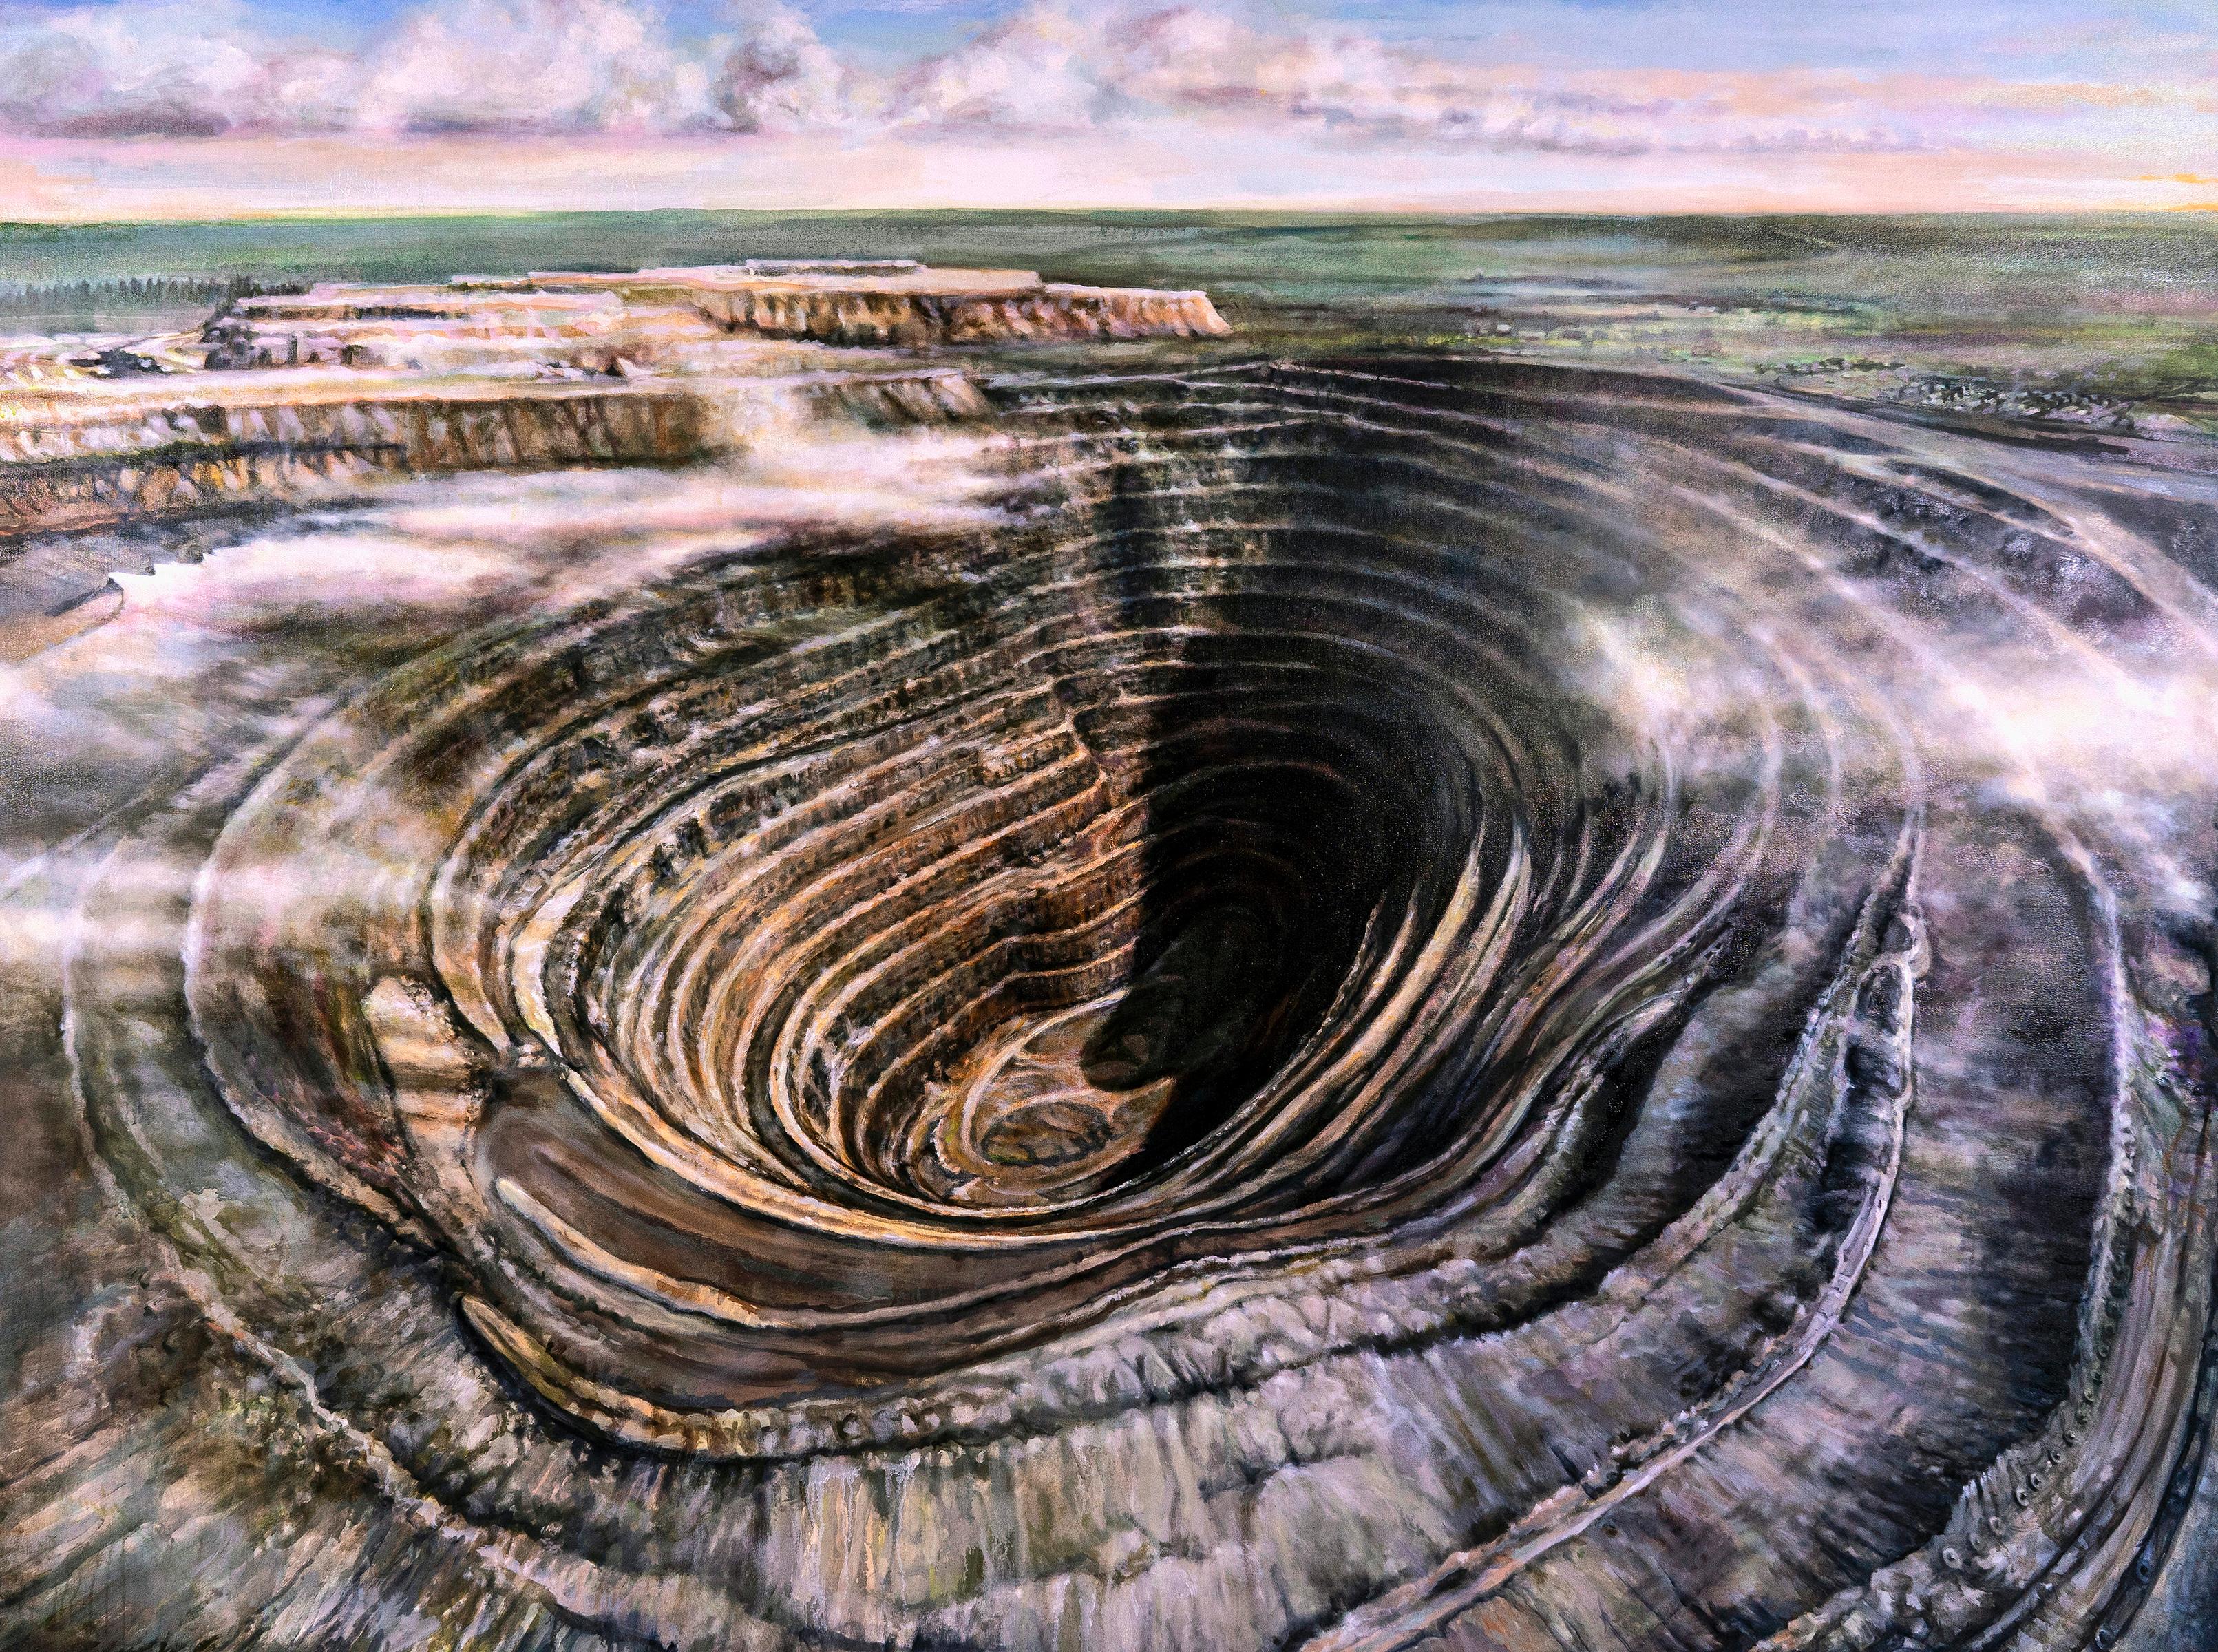 Lawrence Gipe Landscape Painting - Russian Drone Painting No. 1 (Mir Diamond Mine, Siberia)